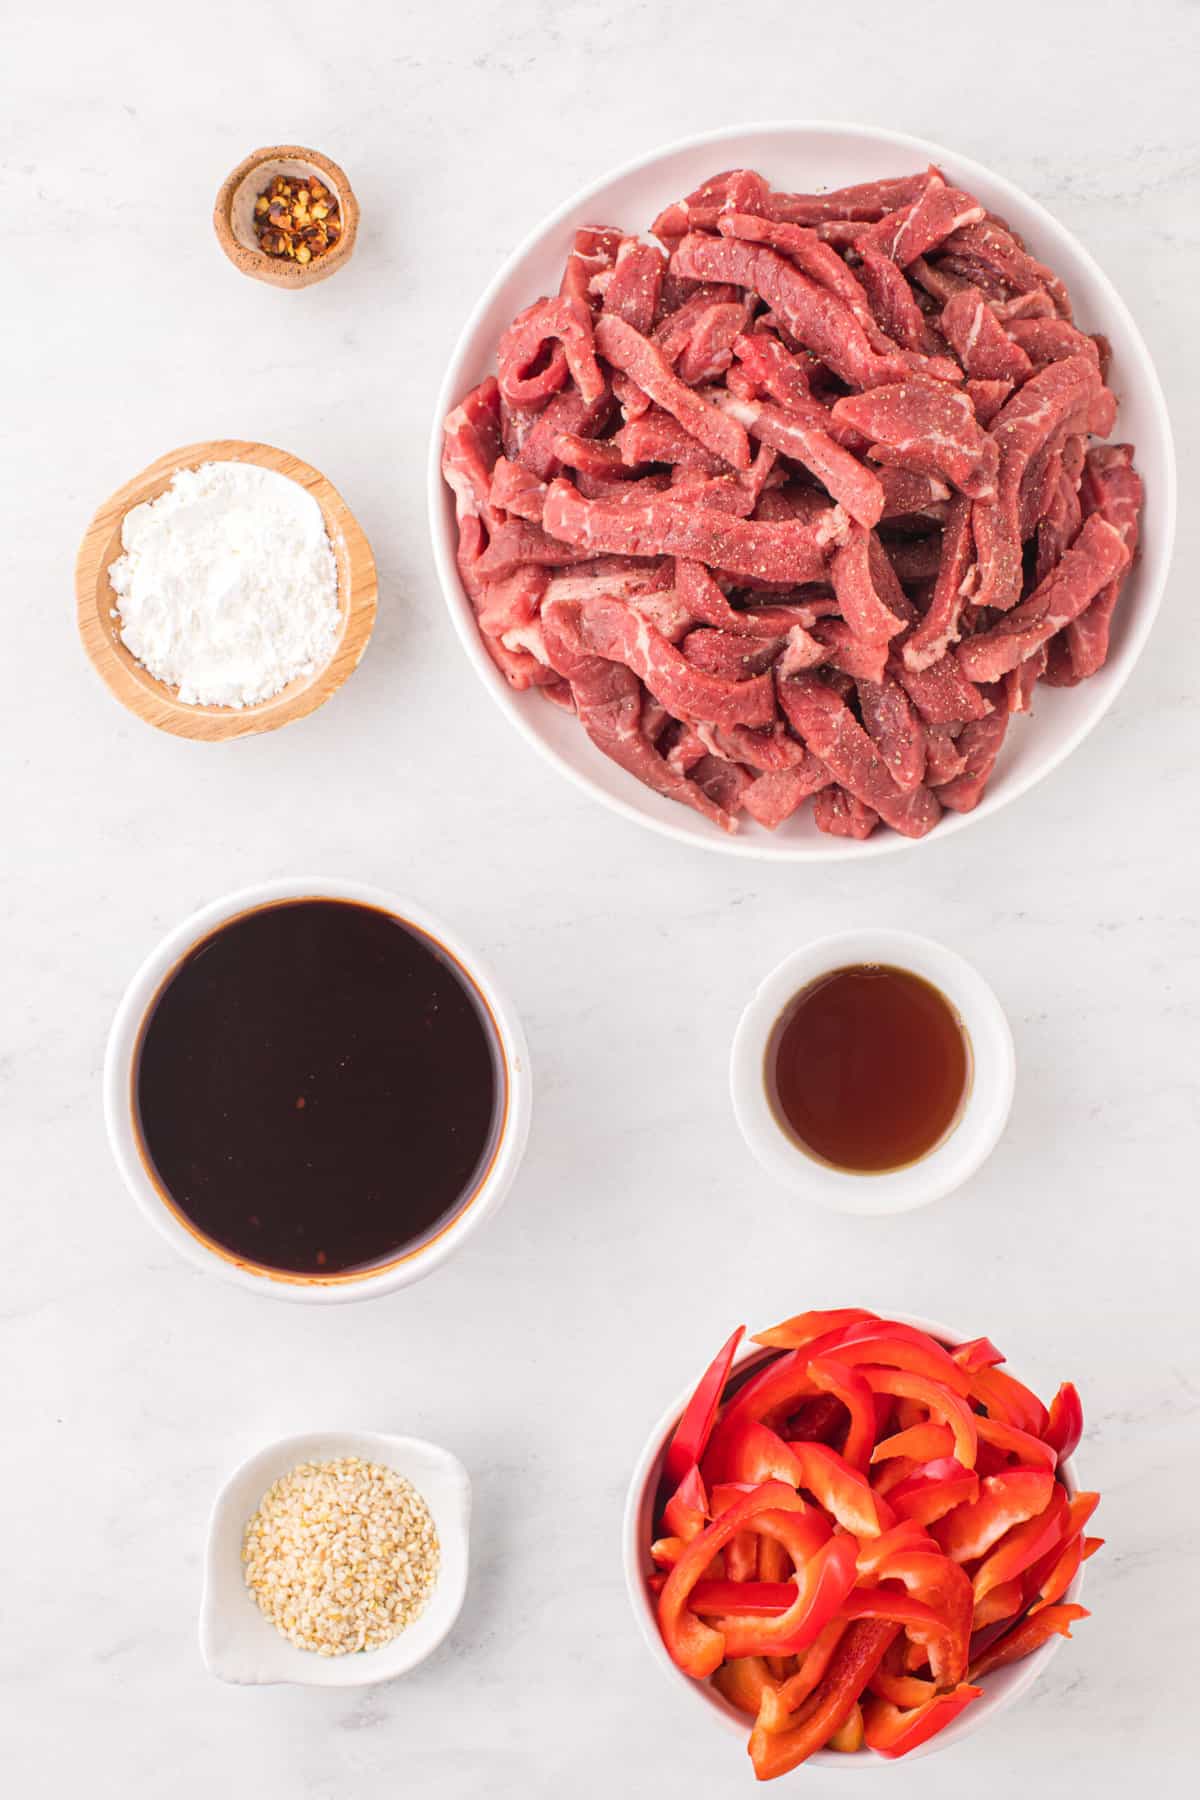 The ingredients for szechuan beef are placed on a white countertop. 